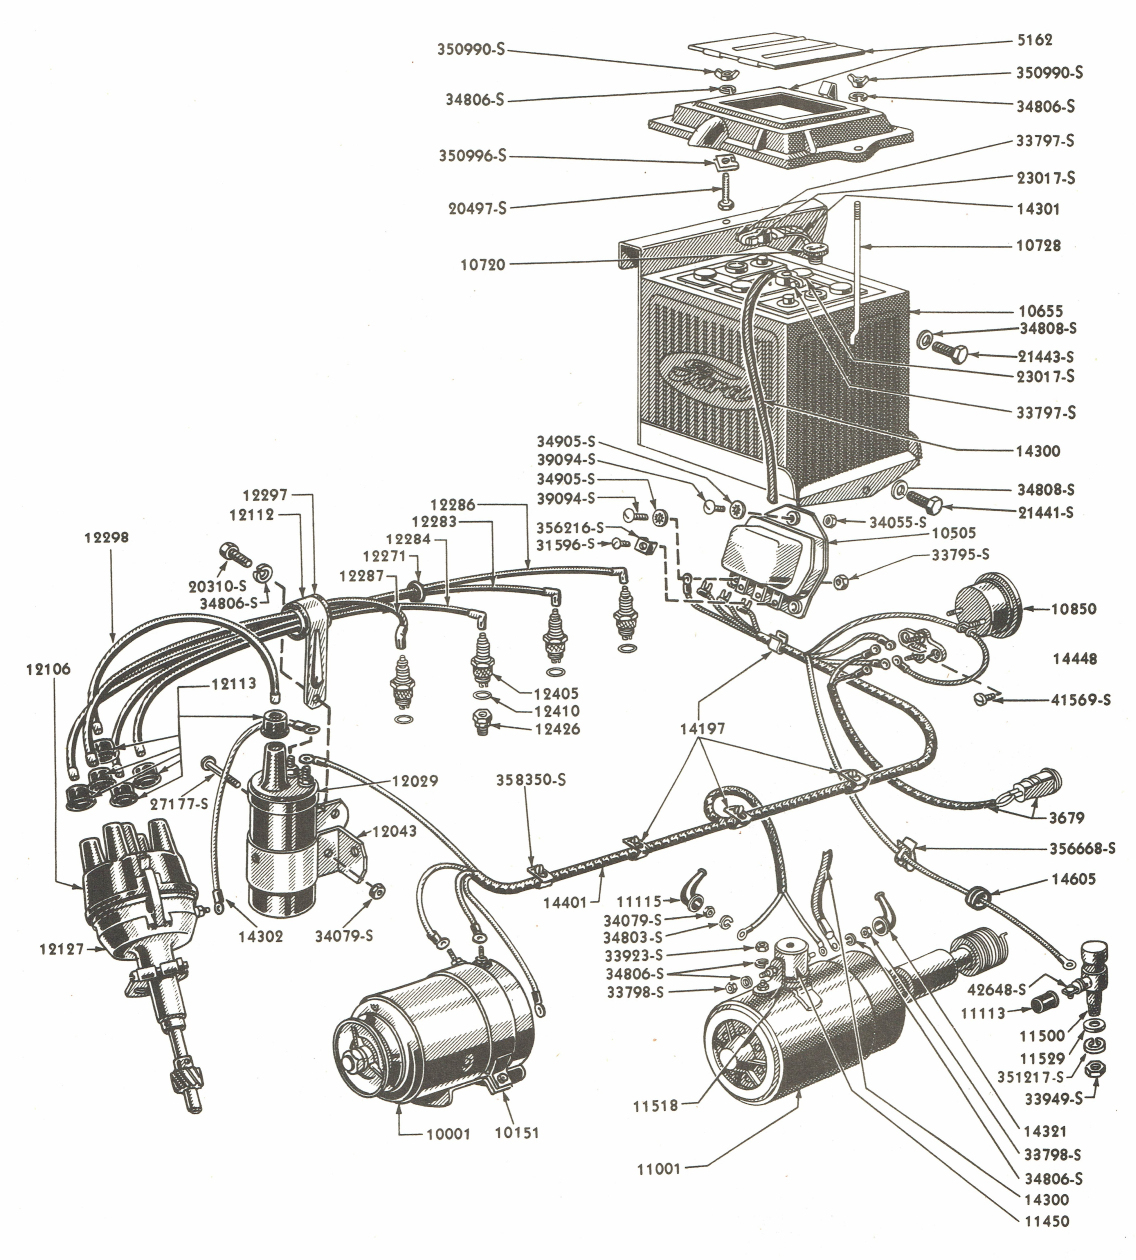 Diagram] 1950 Ford Tractor Wiring Diagram Full Version Hd